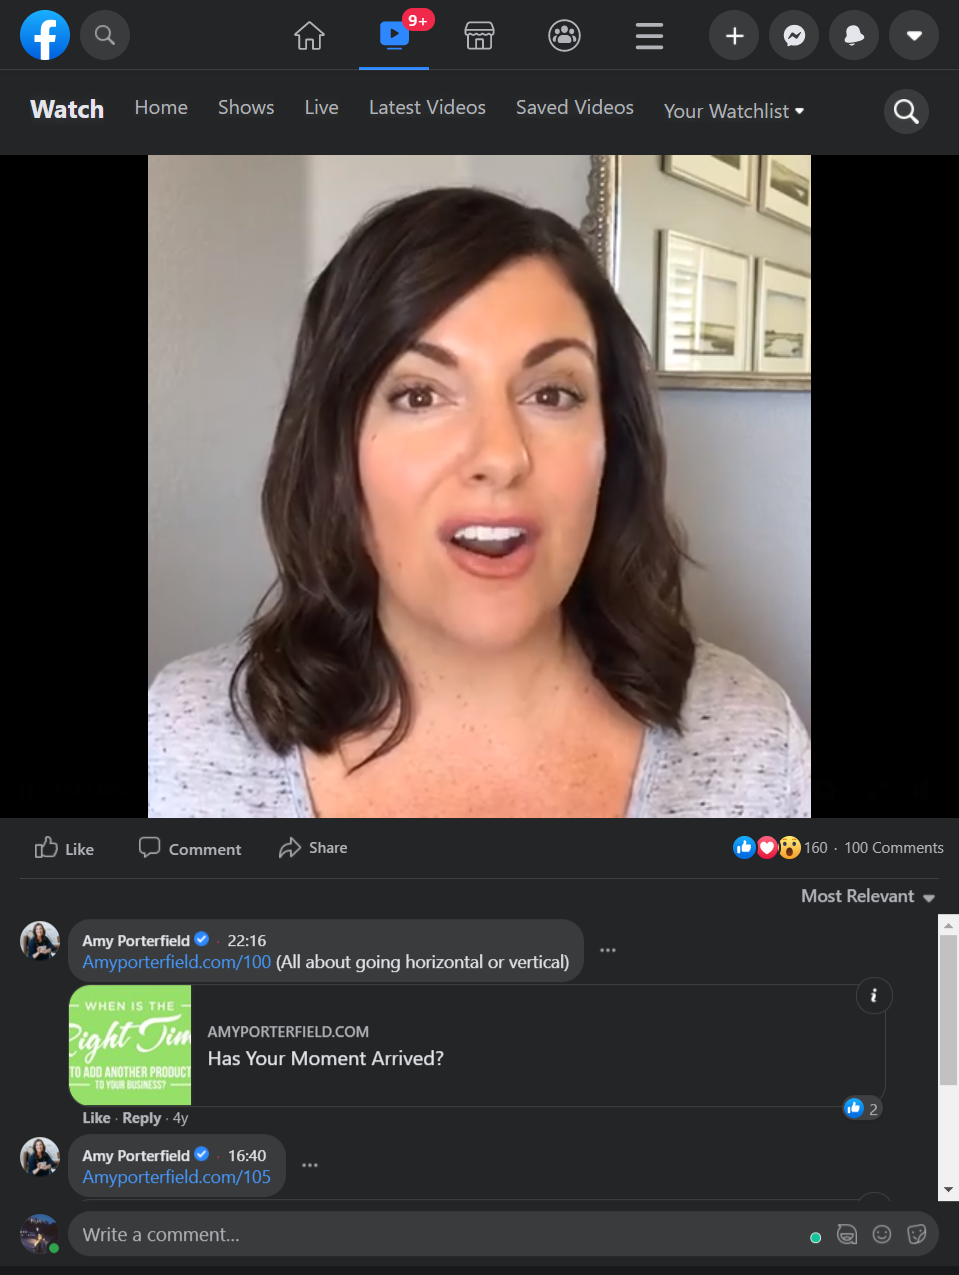 facebook live event by amy porterfield